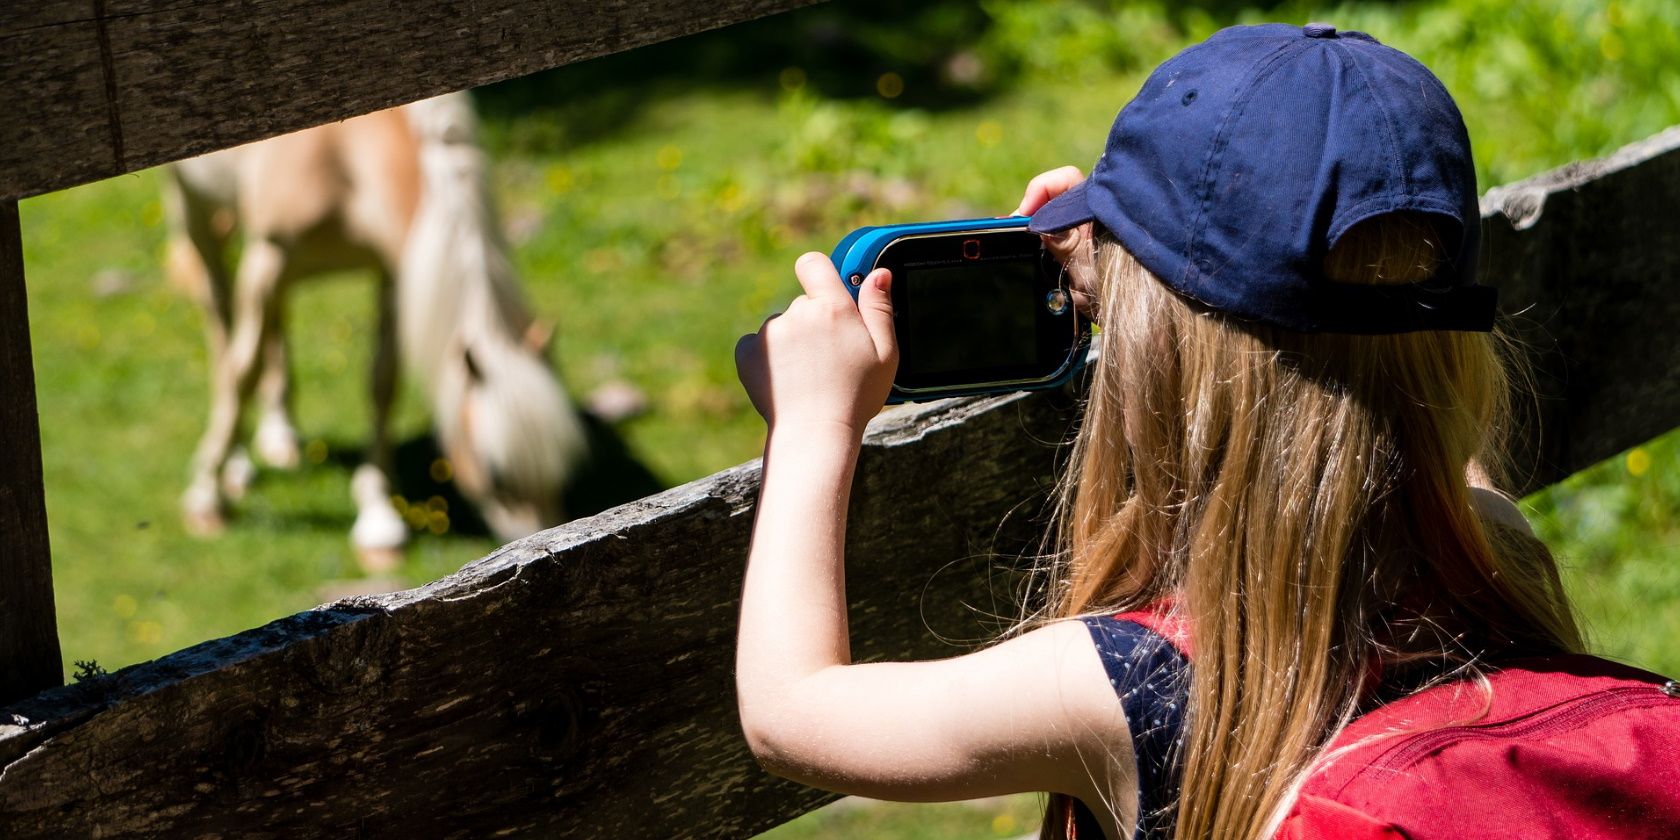 This highly-rated VTech kids camera is a bargain gift for budding  photographers on Cyber Monday